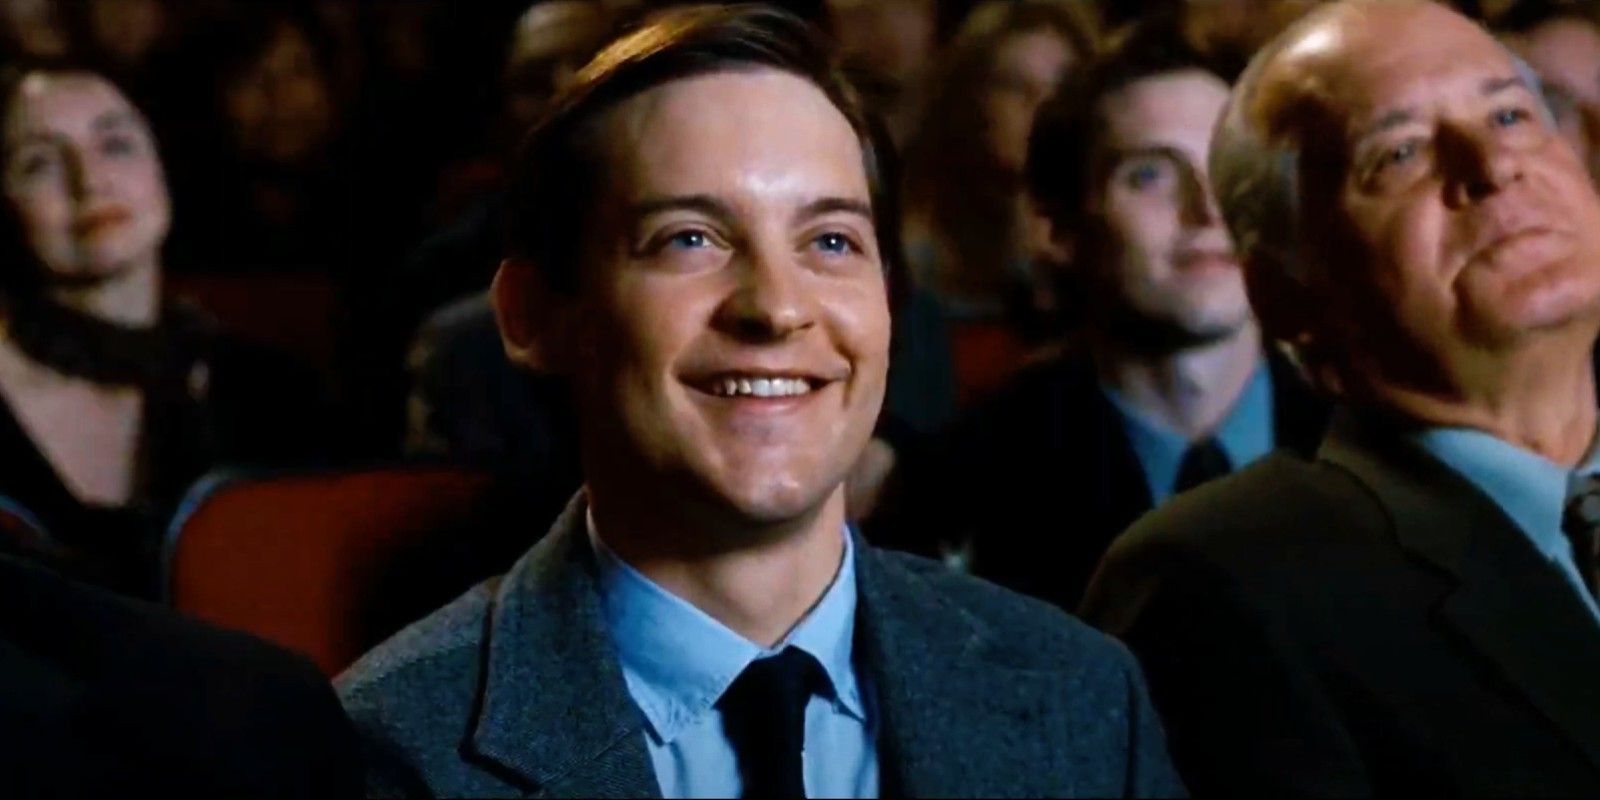 Spider-Man star Tobey Maguire breaks silence verdict on another